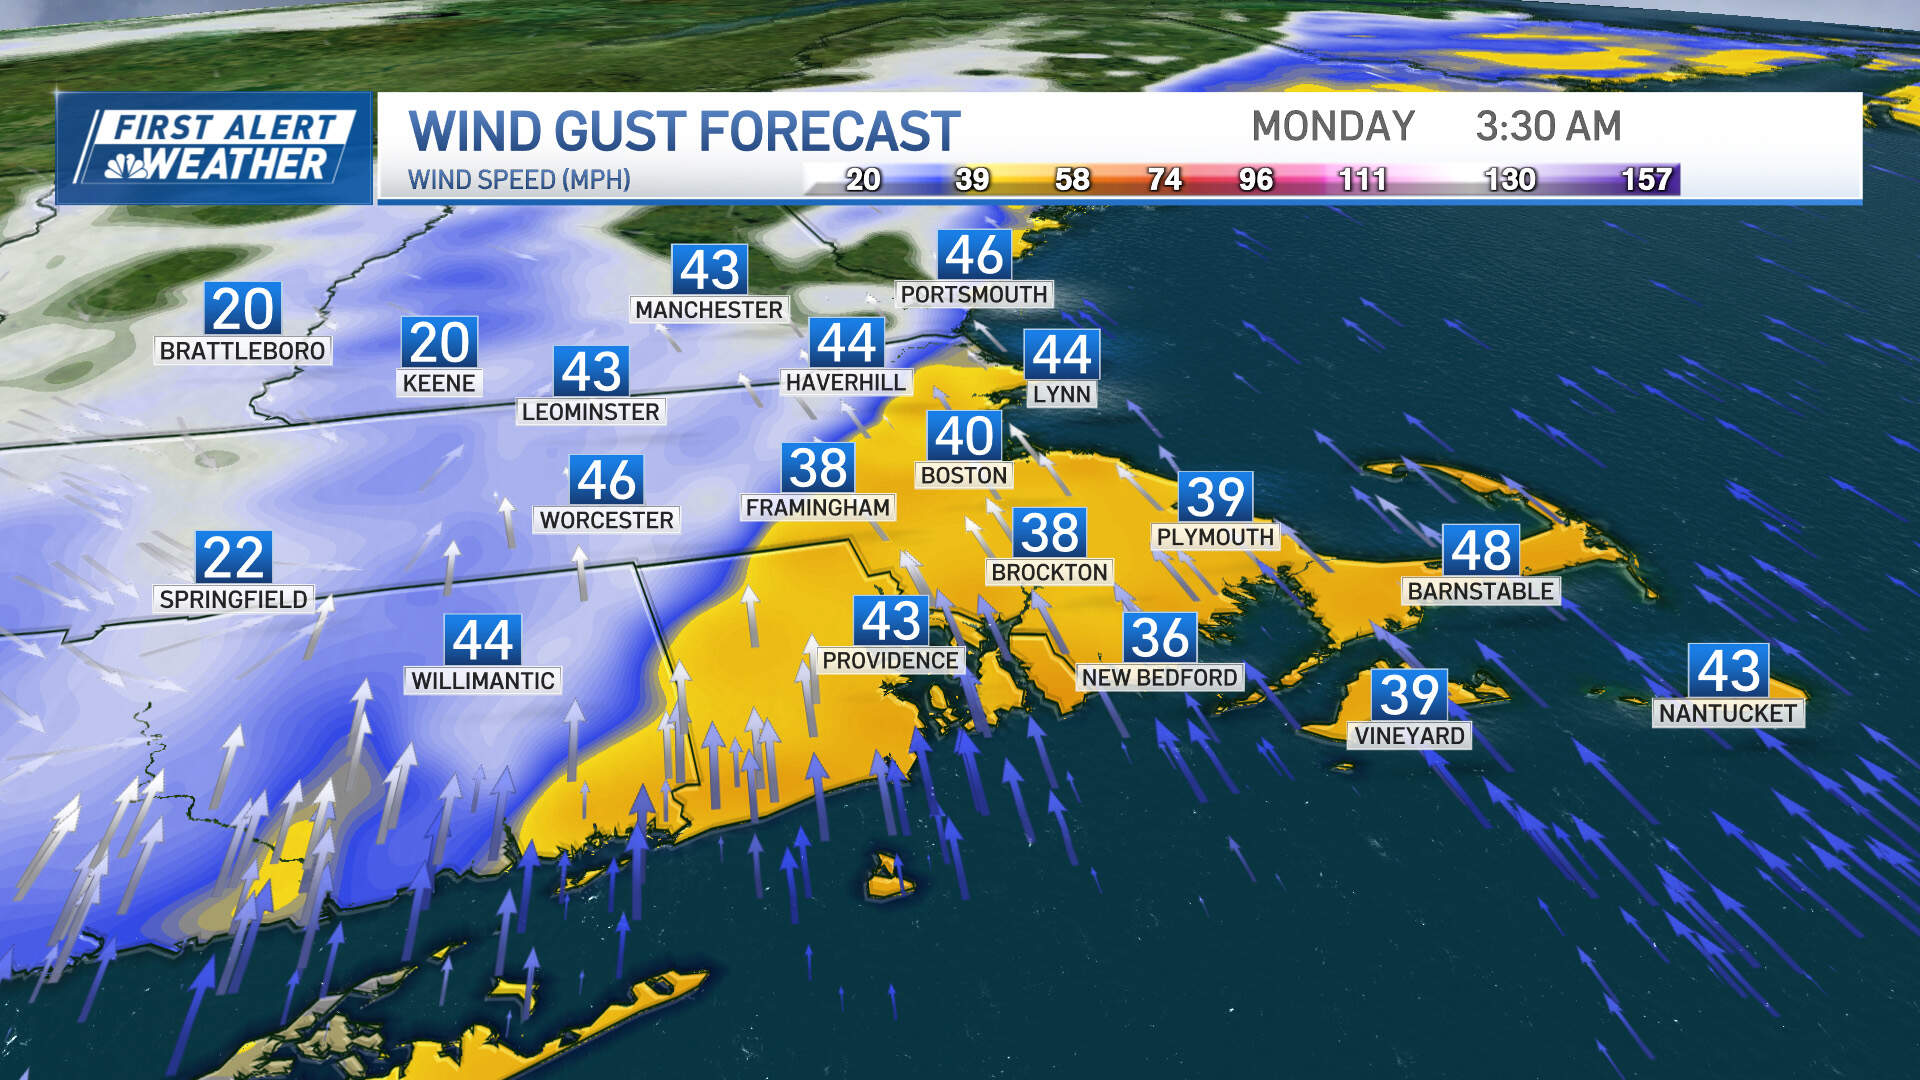 The storm, starting Sunday night, is expected to bring high wind gusts that could cause outages across the state. (Courtesy of NBC 10 Boston First Alert Weather Team)